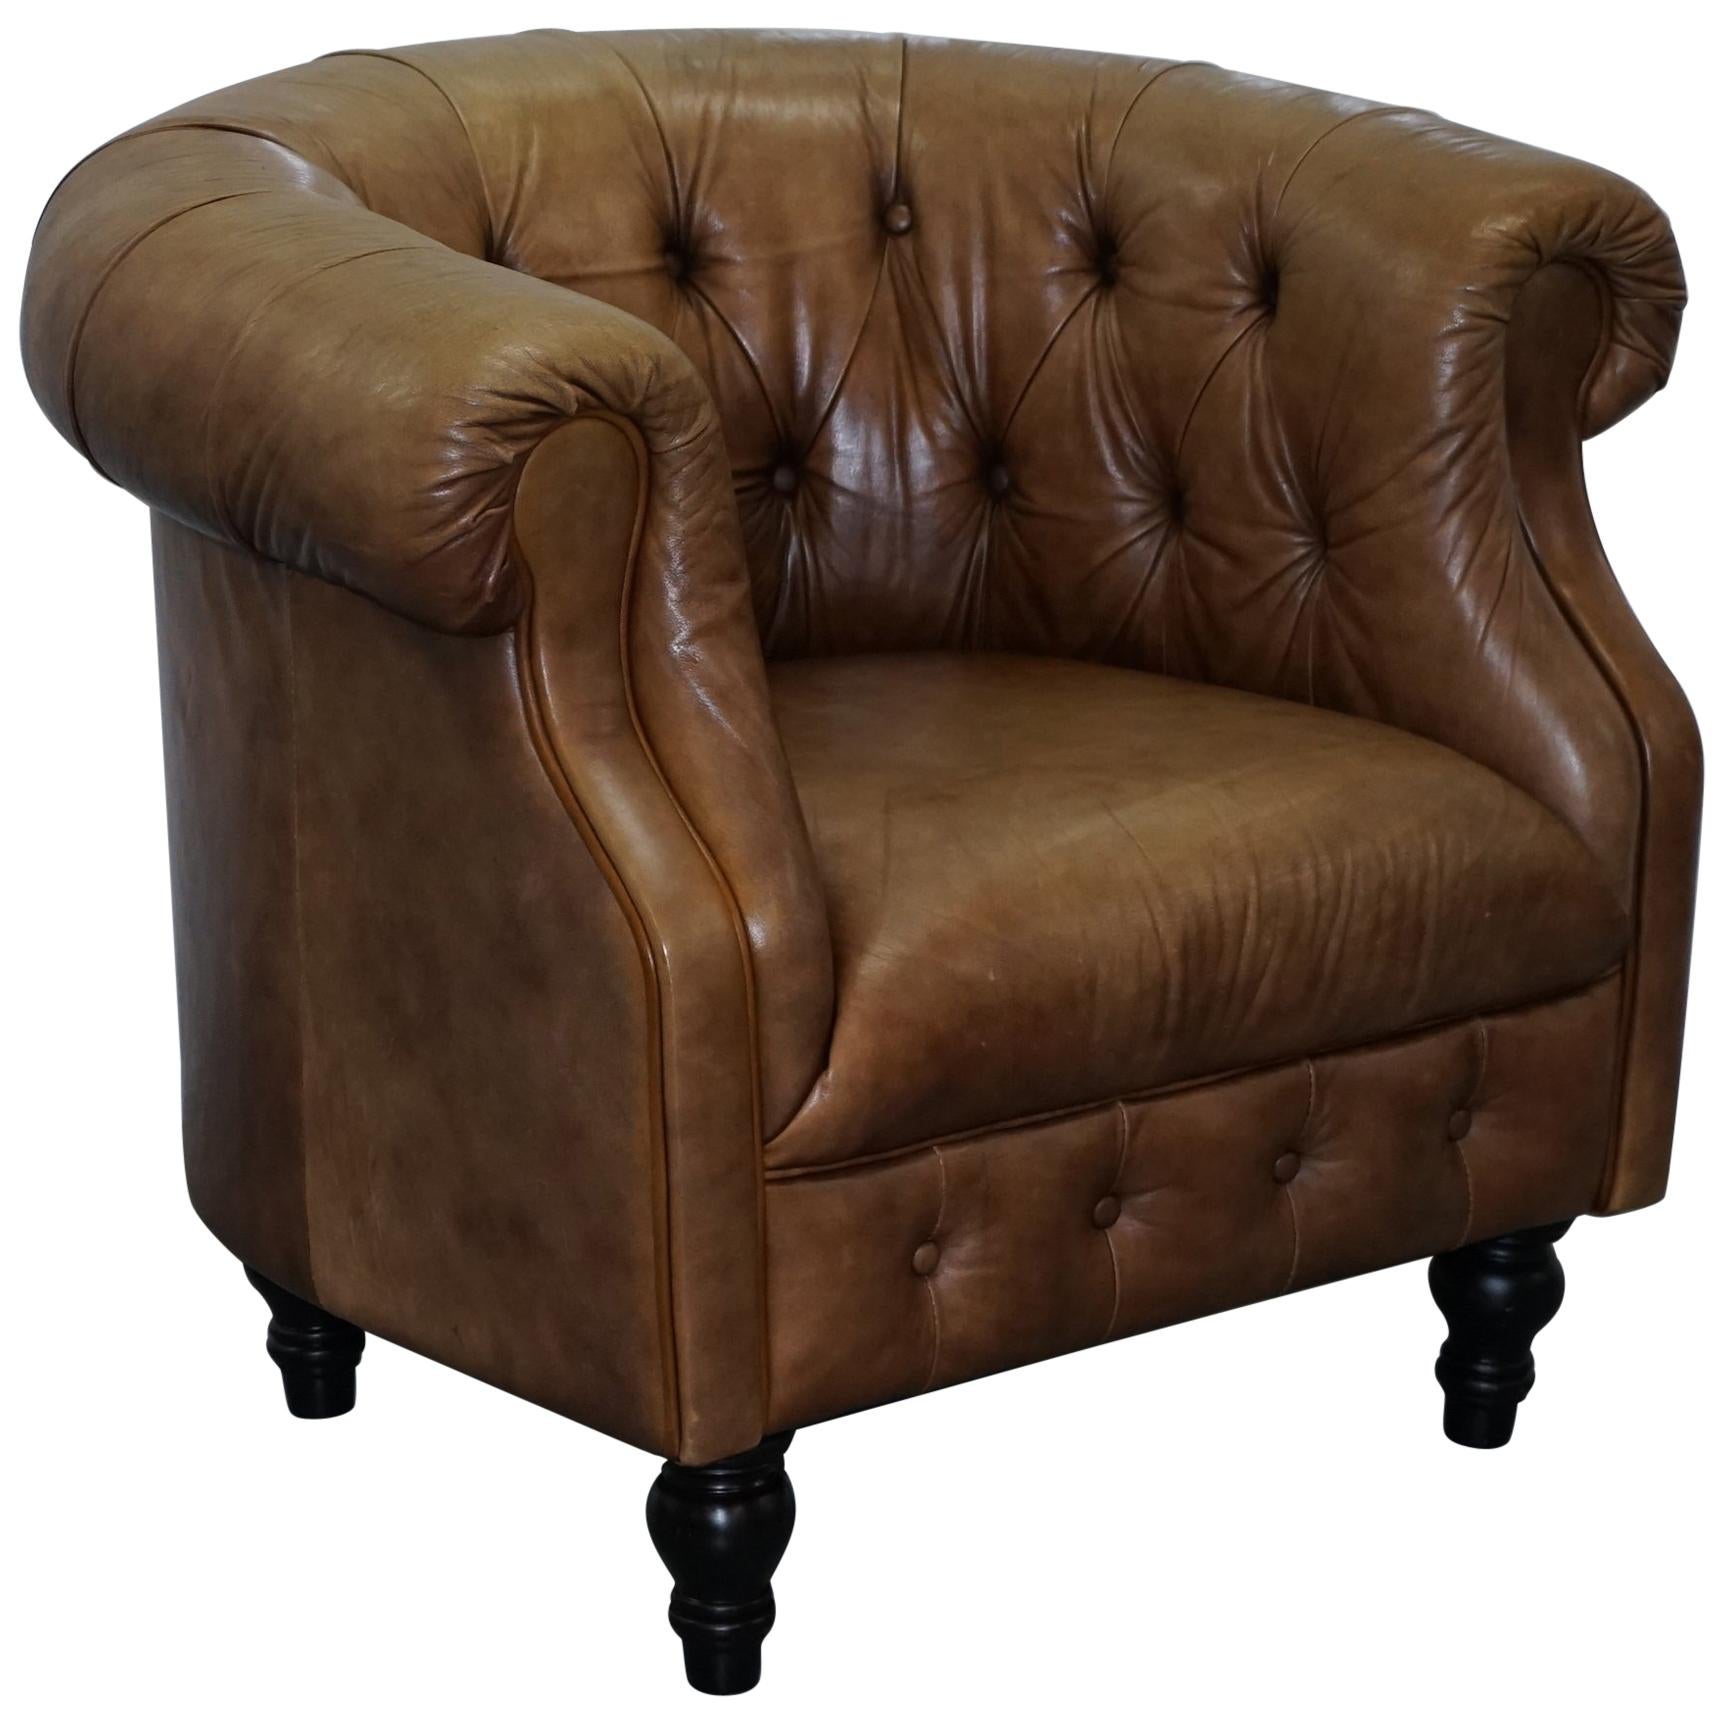 Vintage Tan Brown Leather Chesterfield Buttoned Club Tub Armchair Wood Legs